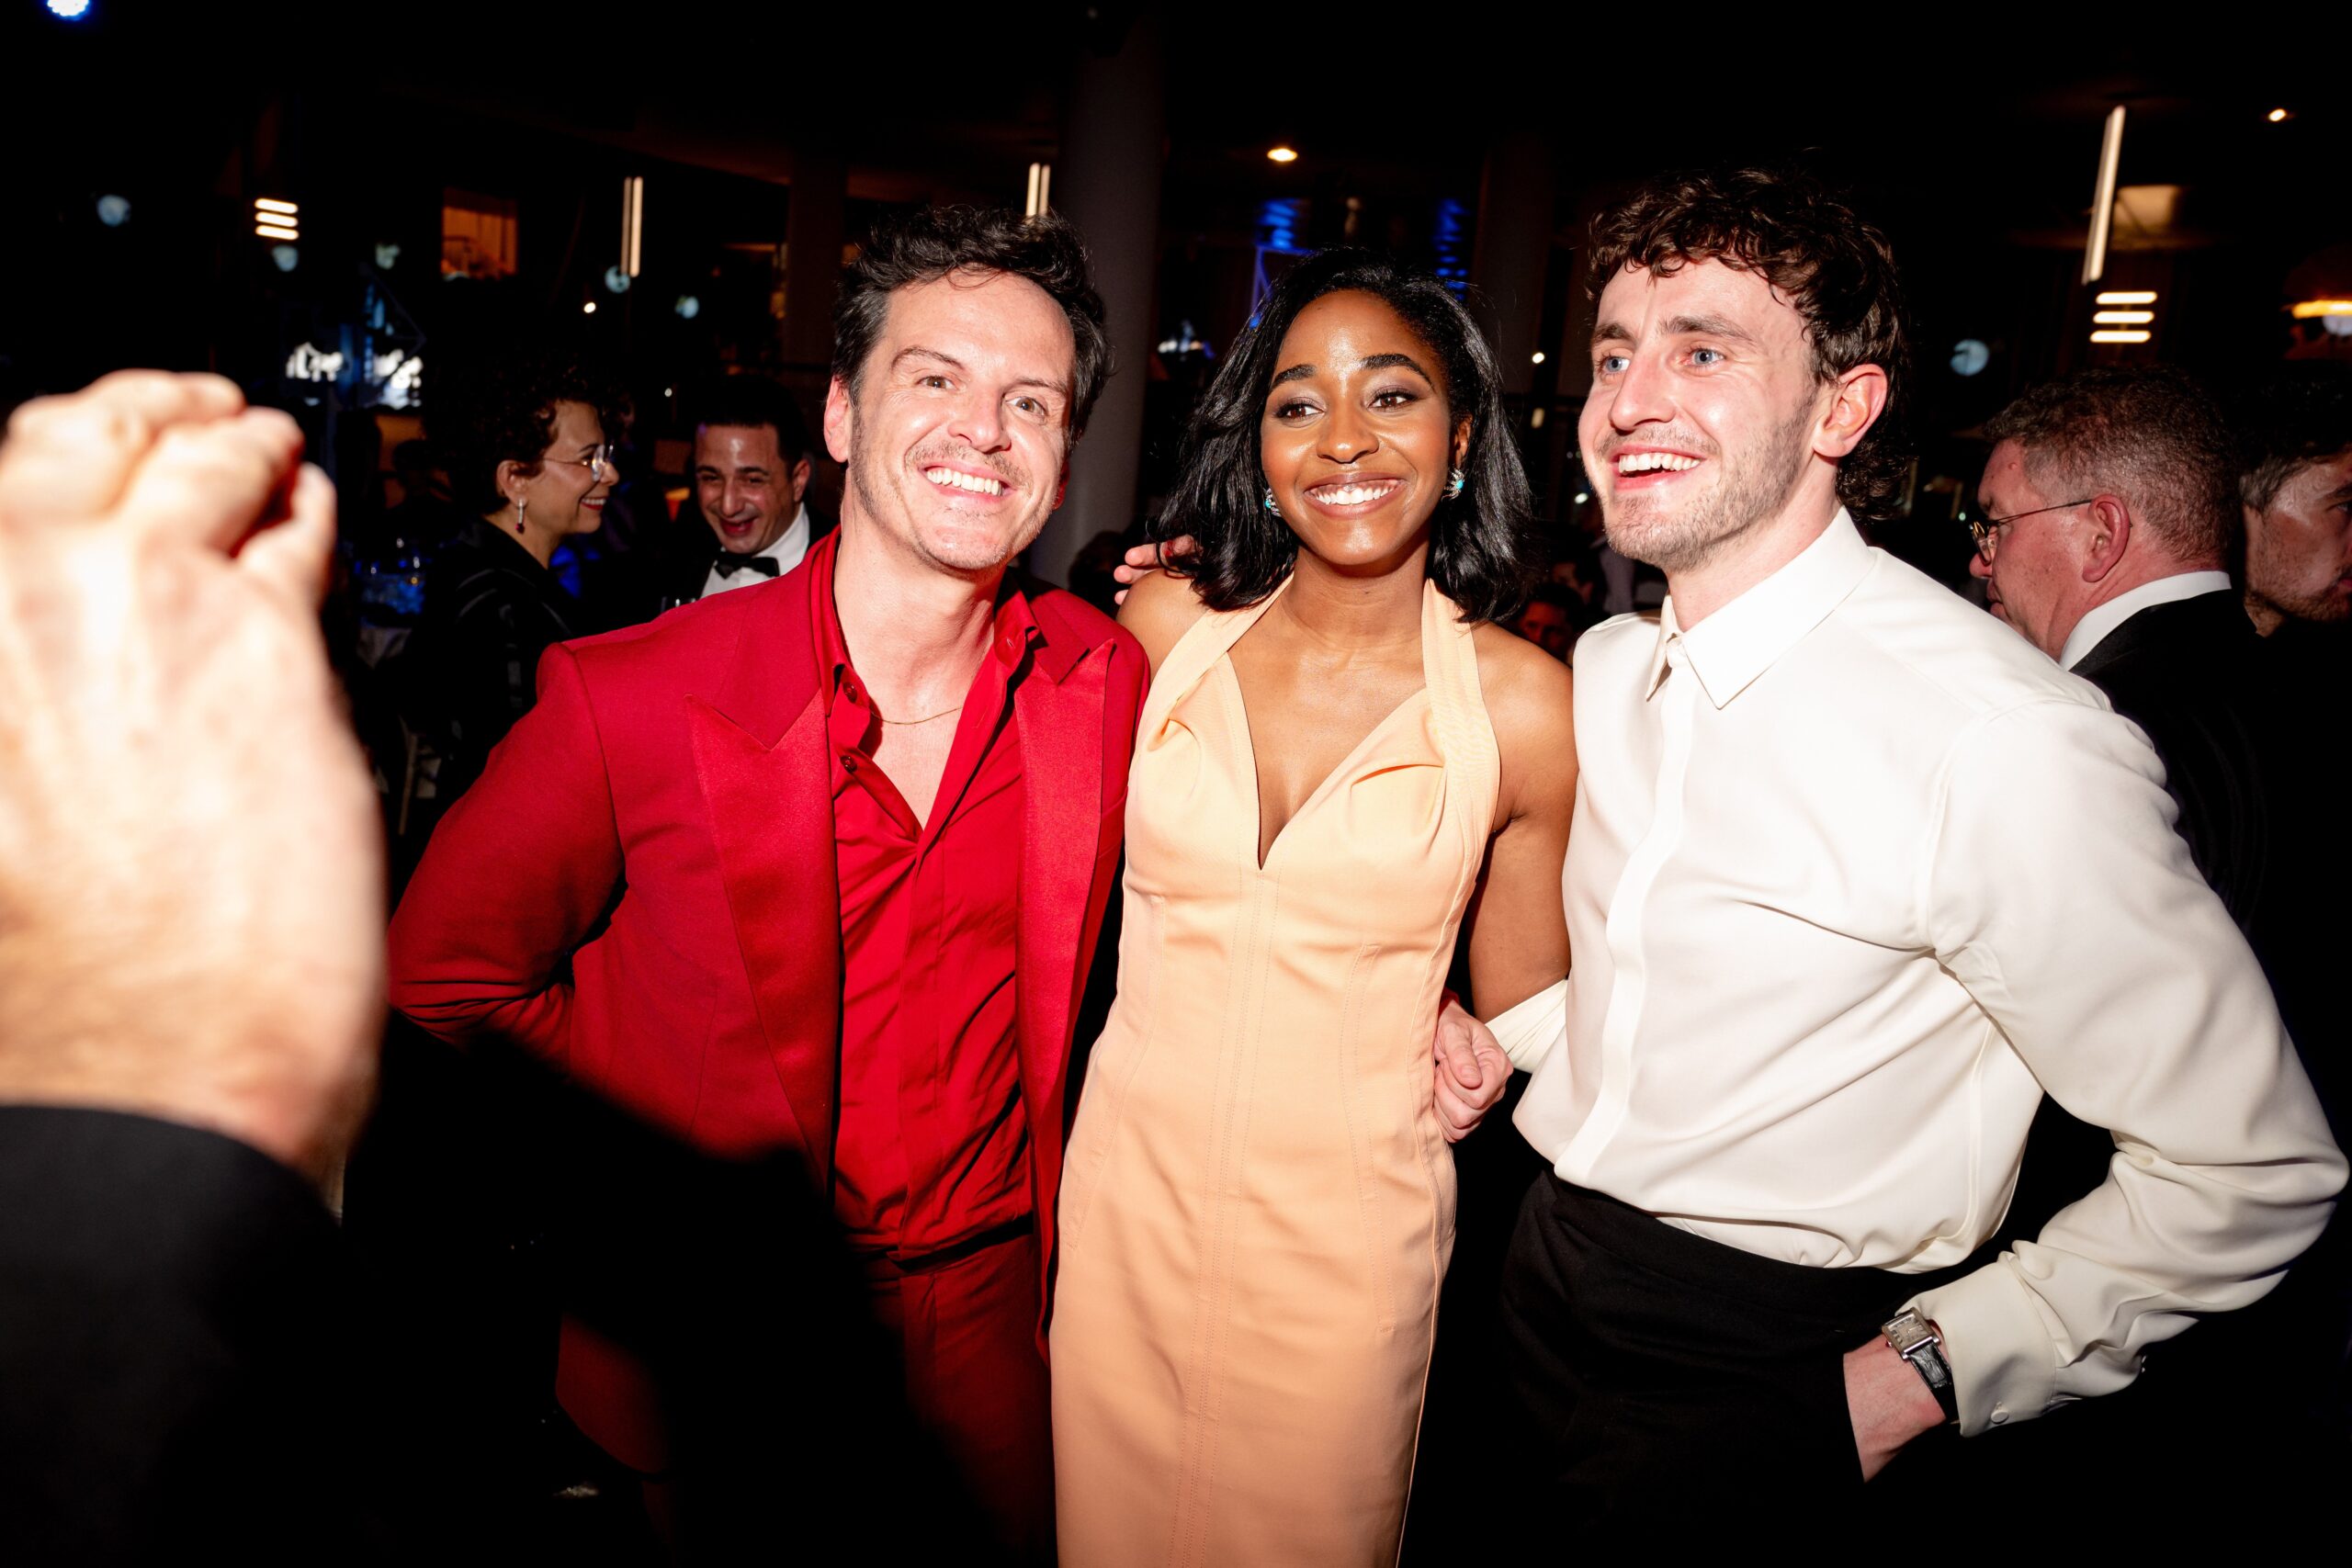 Andrew Scott, Ayo Edebiri, and Paul Mescal posing for a photo at the BAFTAs.